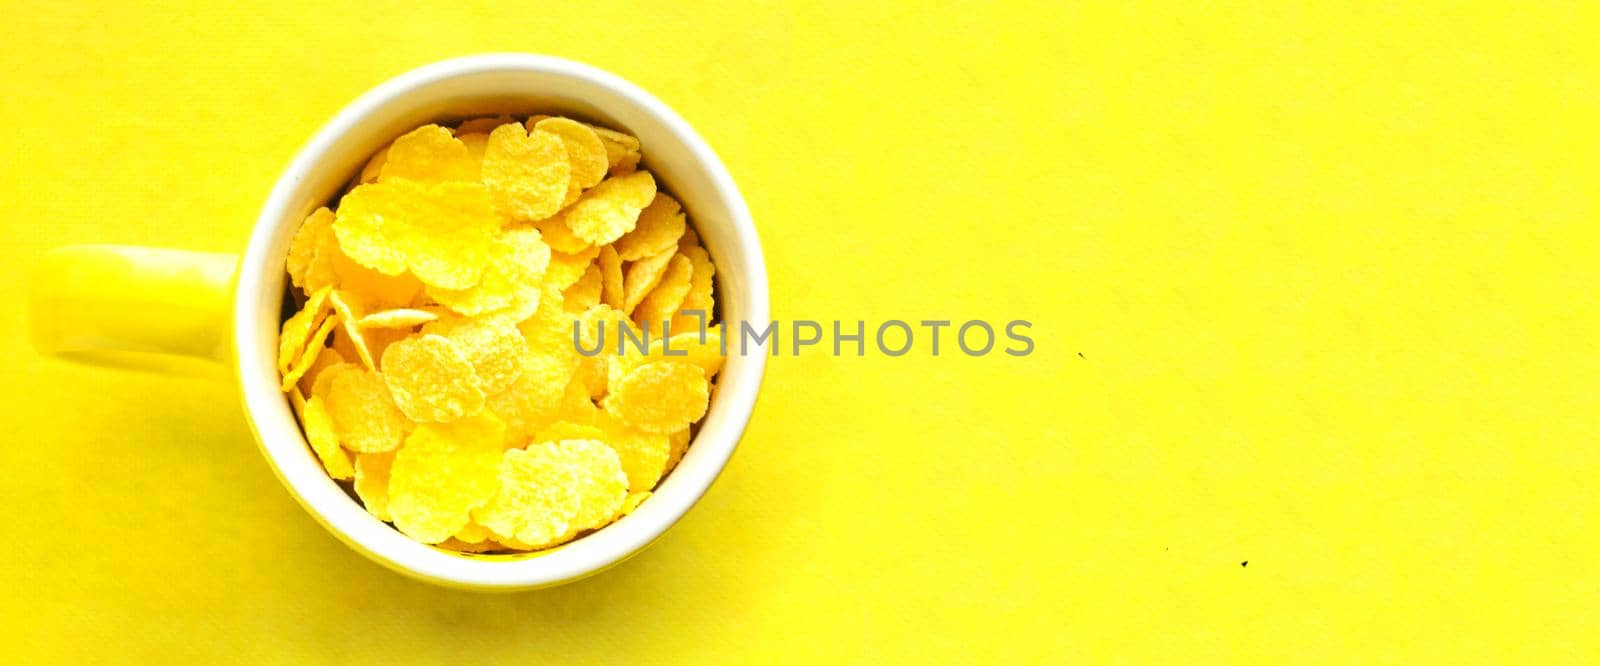 Top view, yellow cup with cornflakes on bright yellow background.